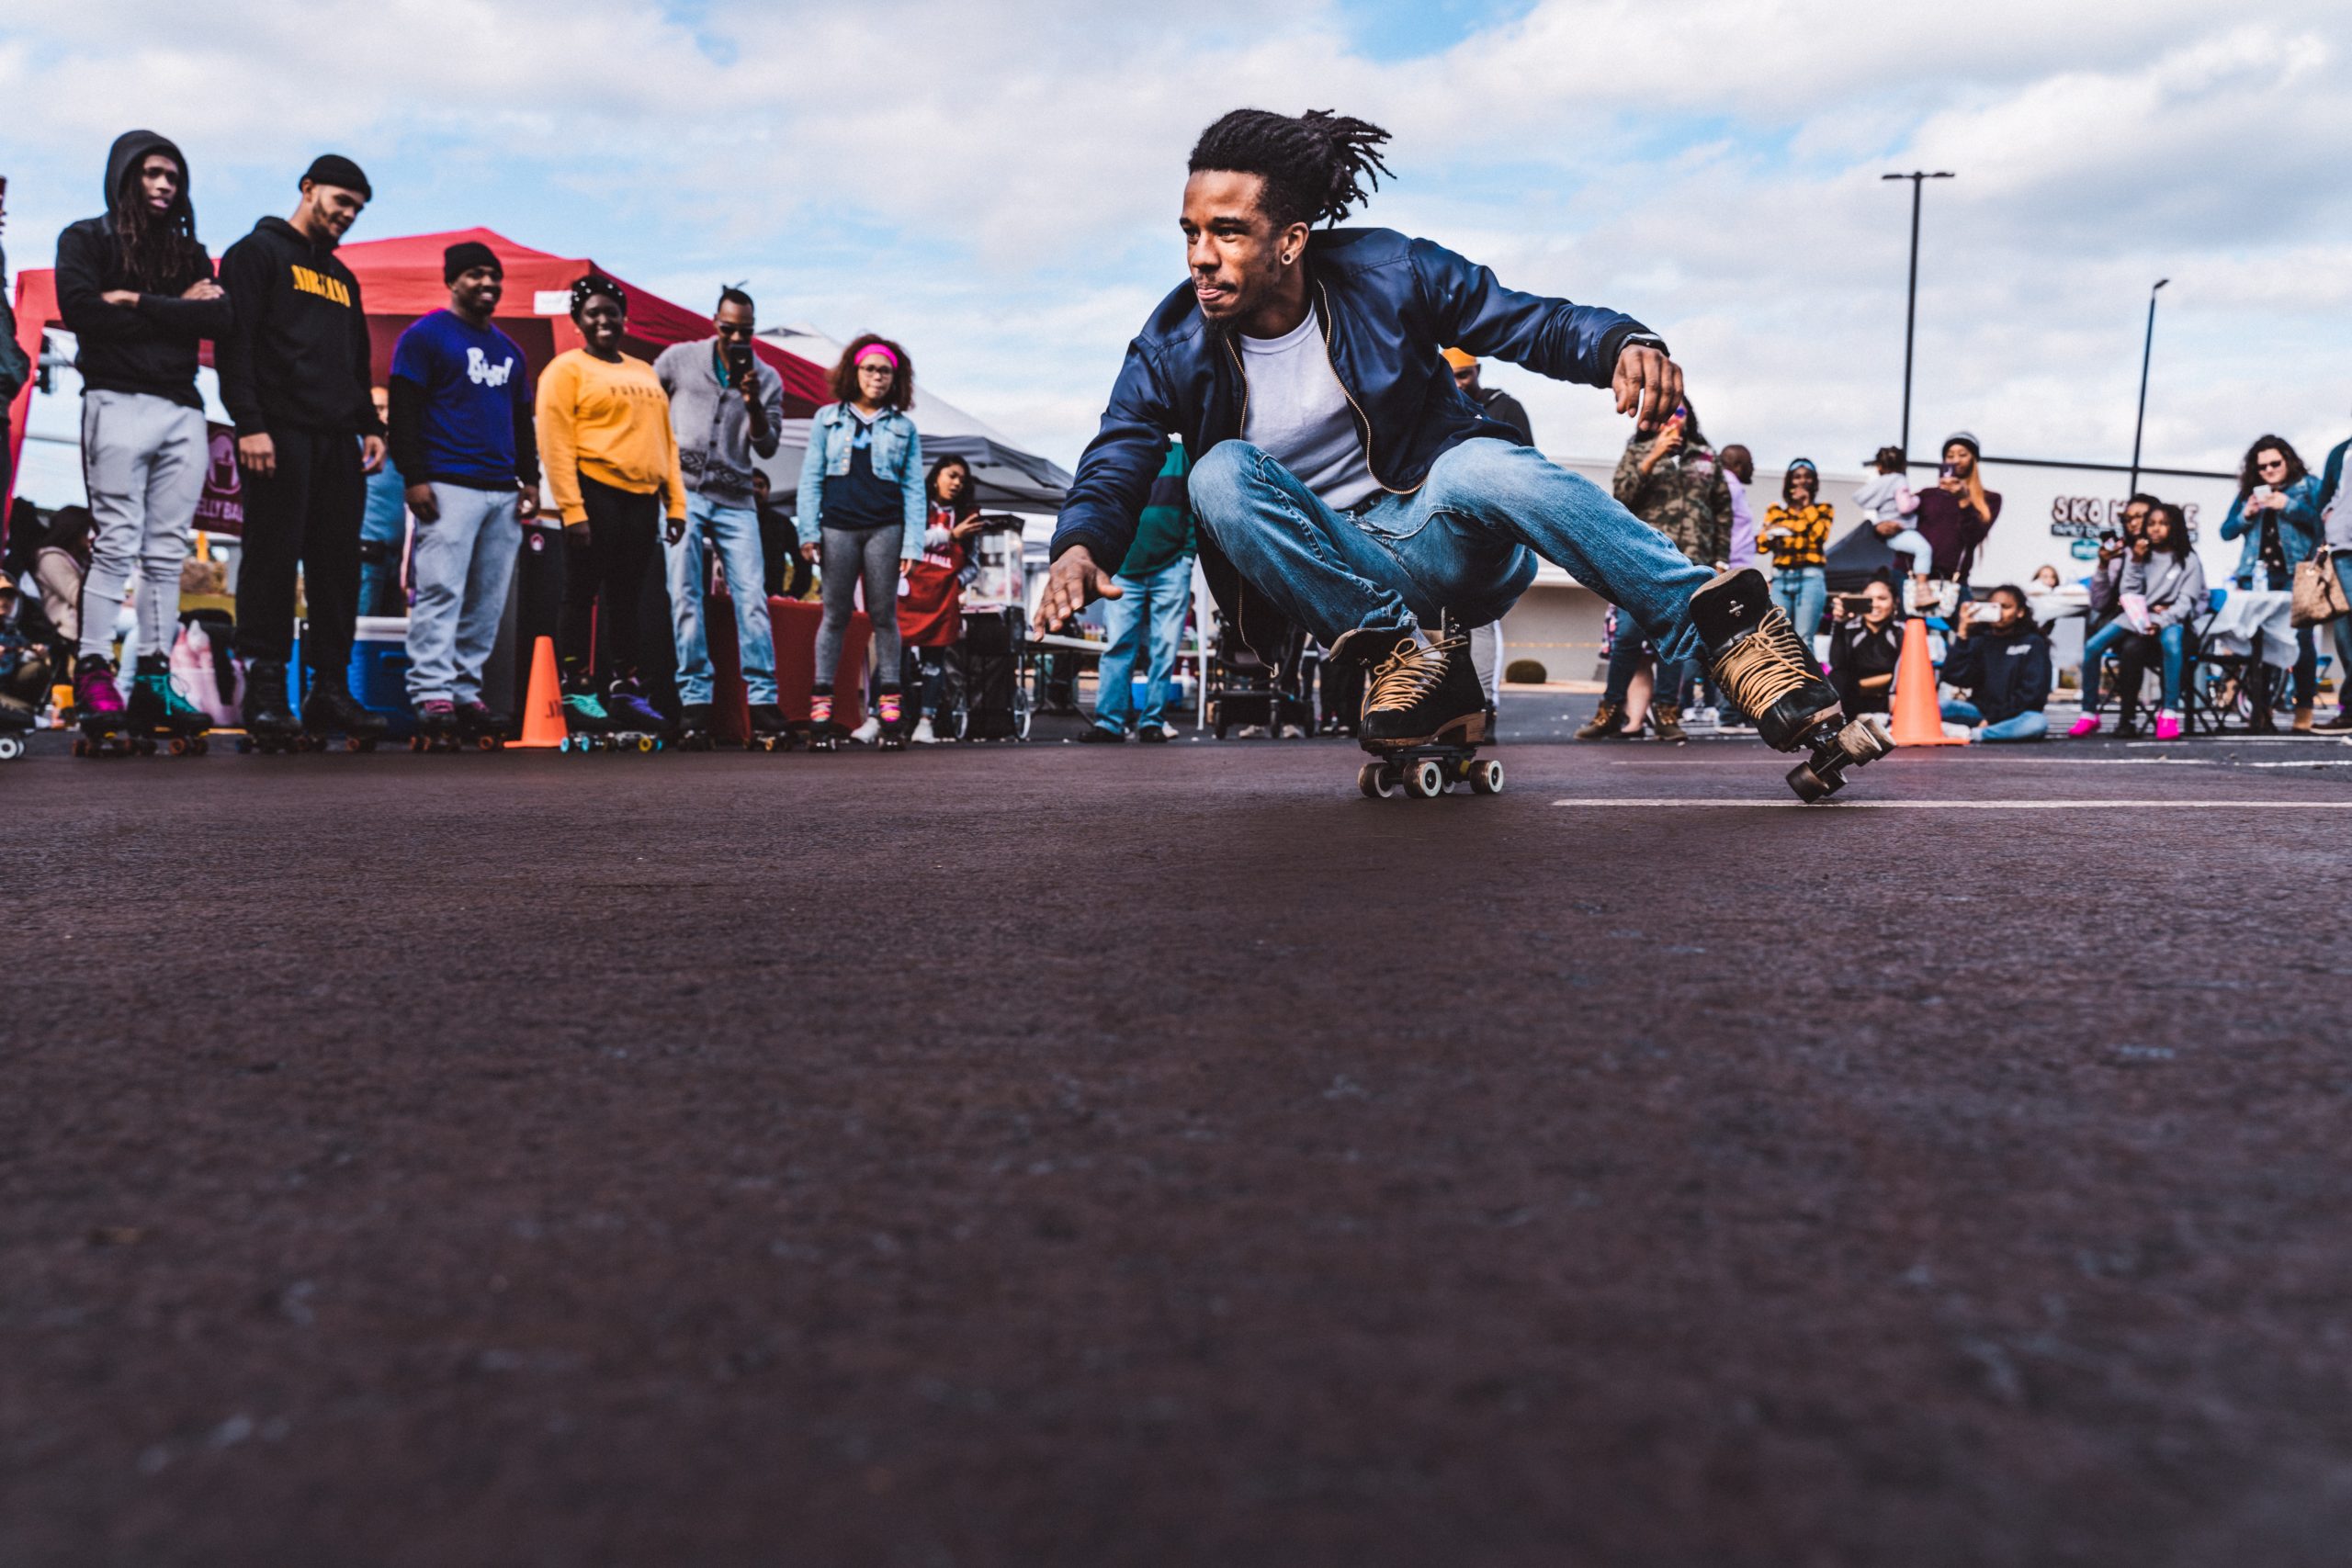 NYC Roller Skate Week Celebrates Black Joy And Historic Contributions